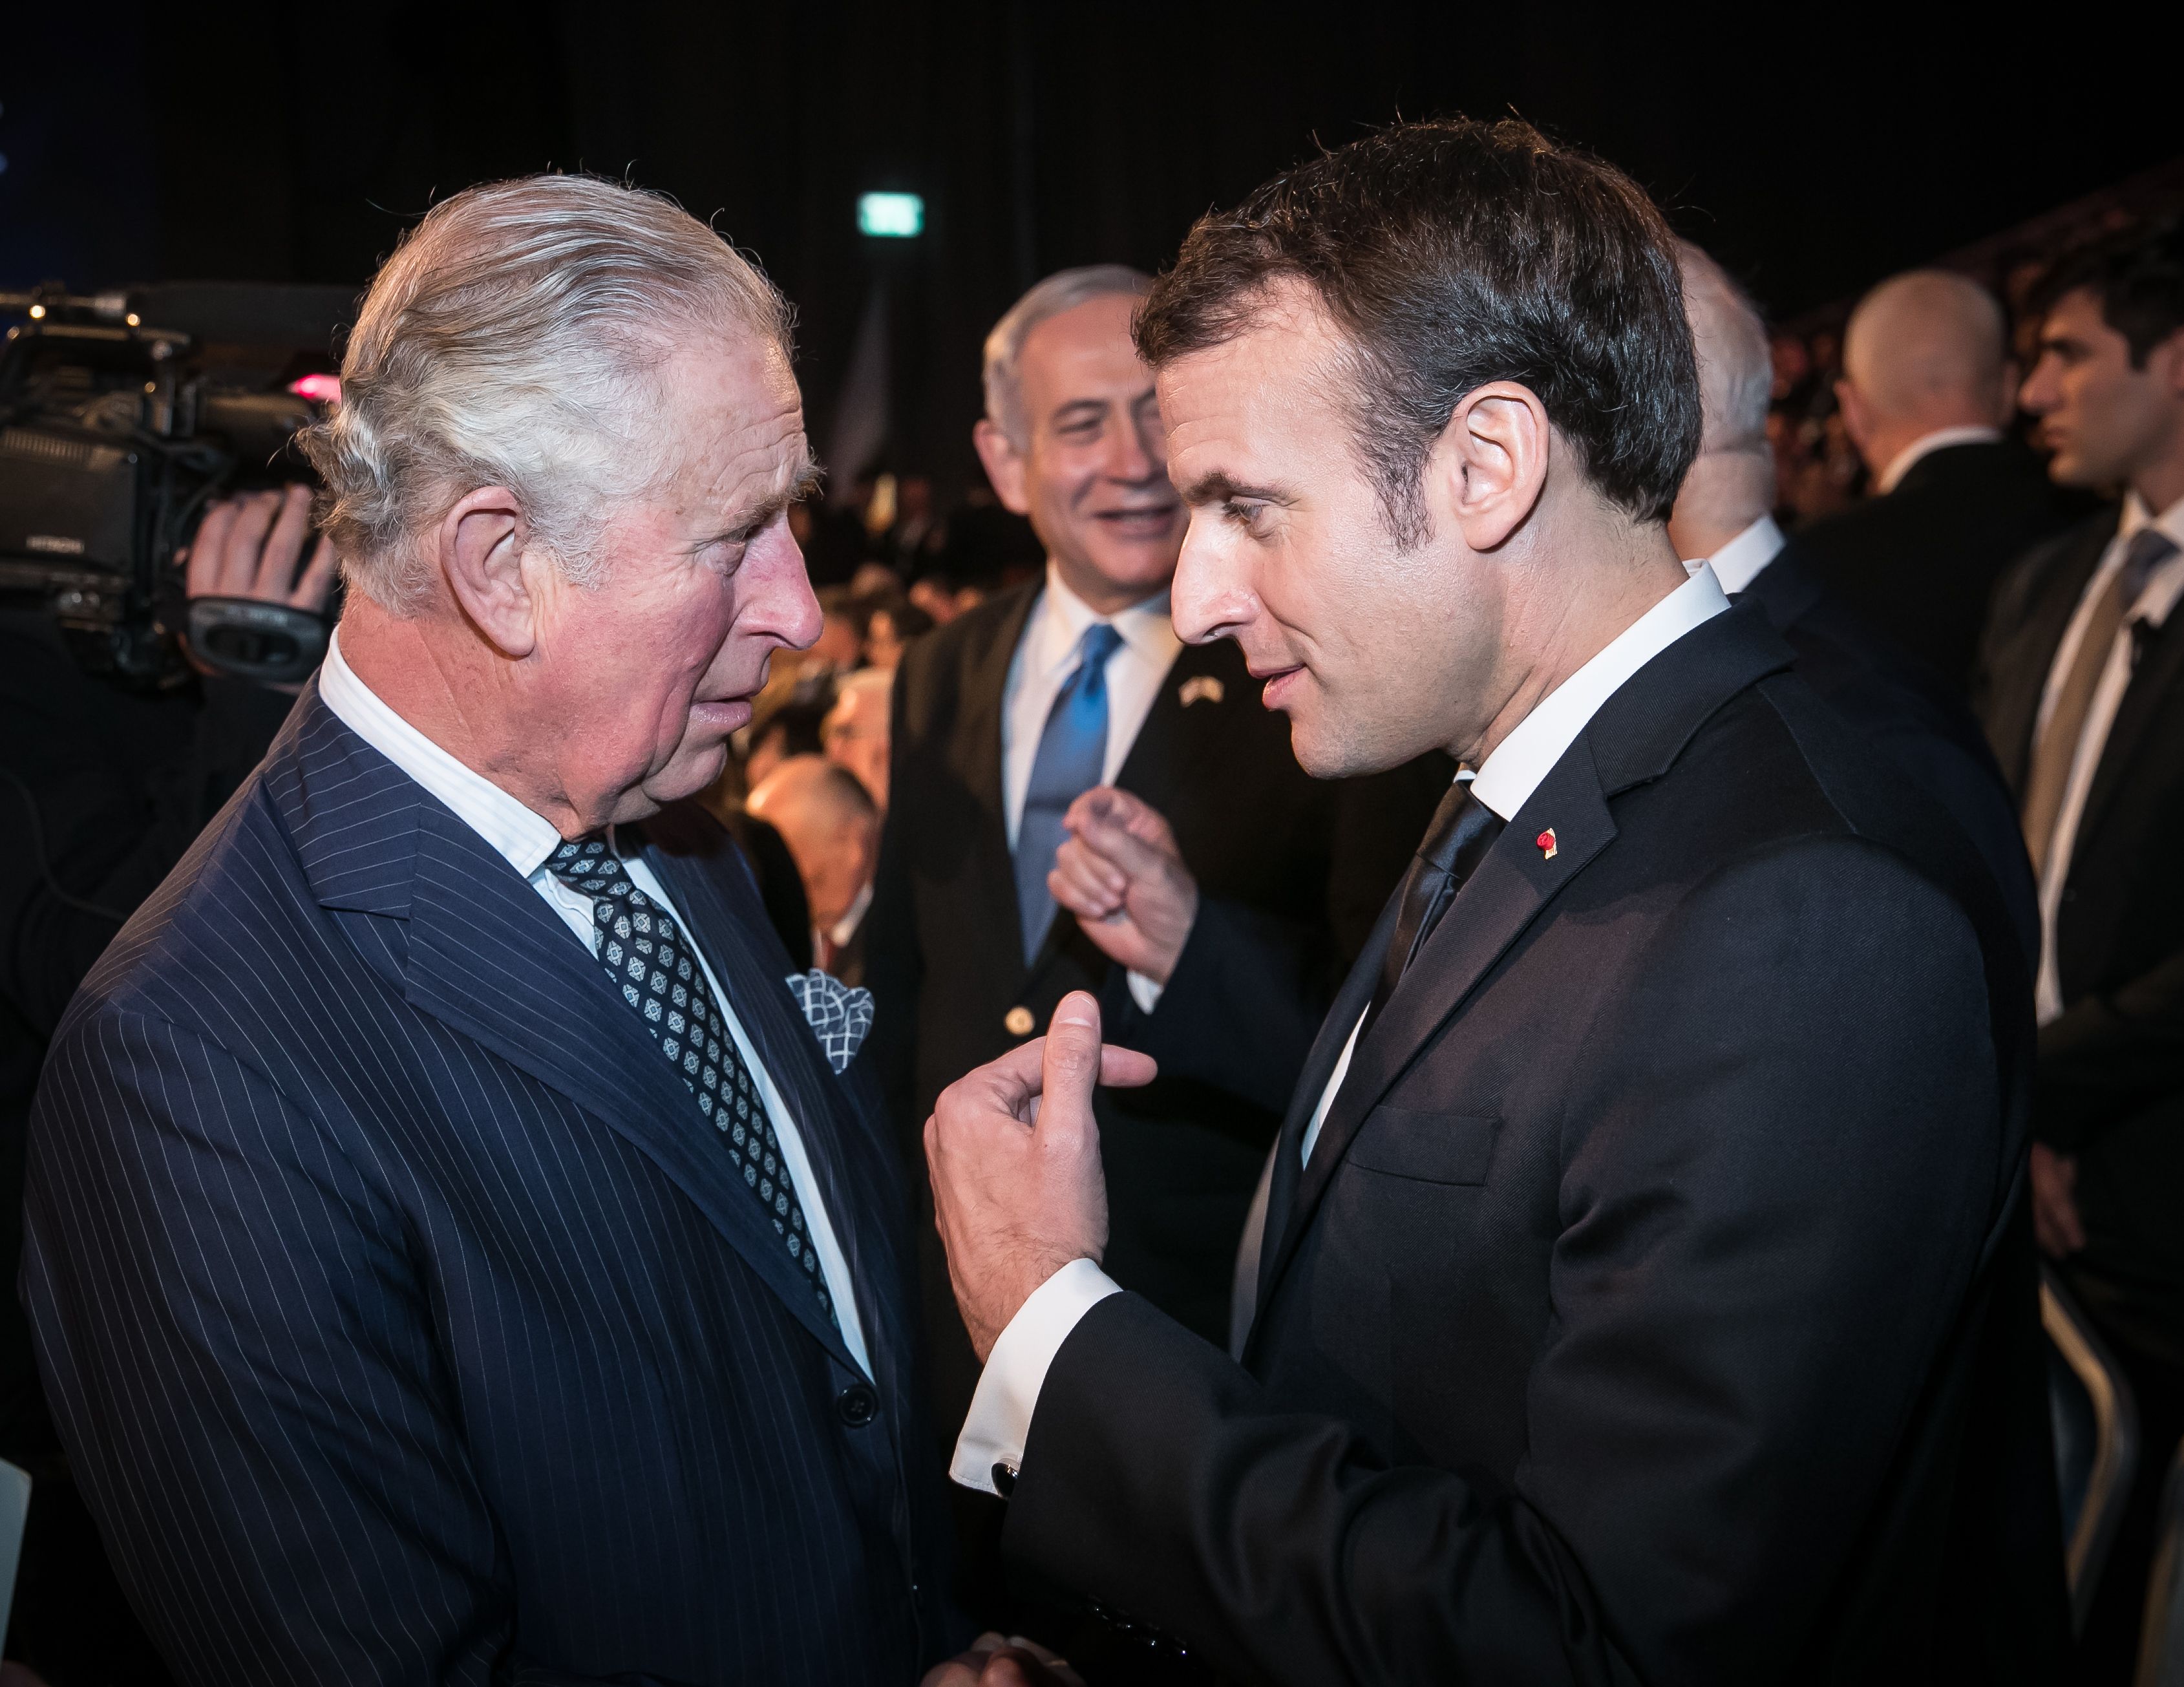 Prince Charles, Camilla to Meet With Emmanuel Macron at Clarence House as Lockdown Eases in the UK